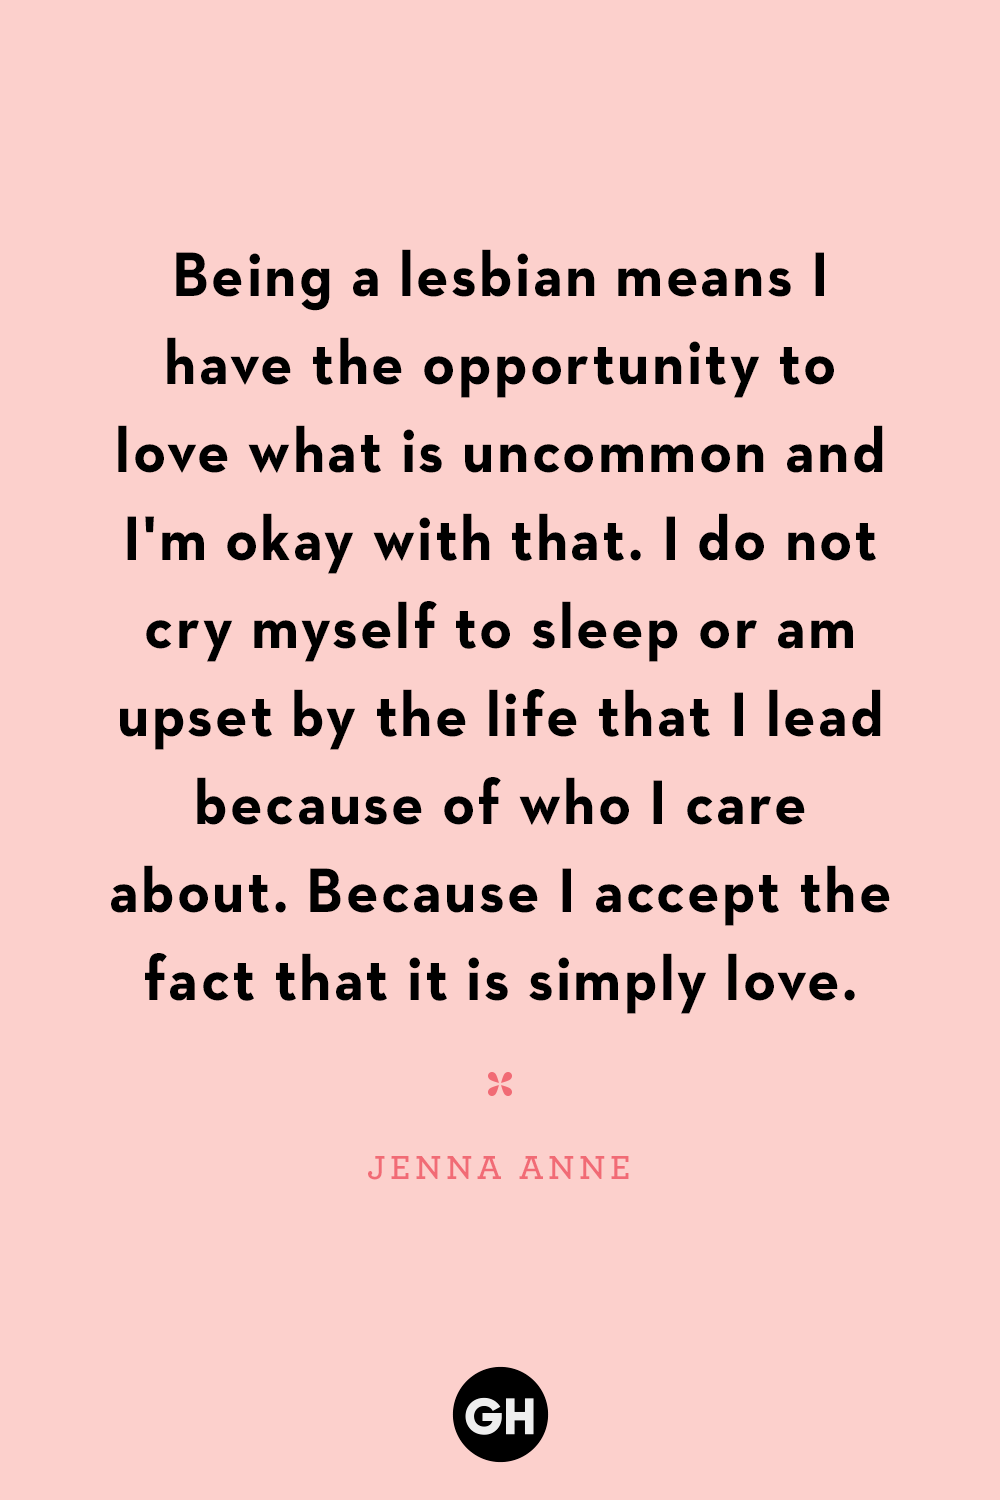 25 Romantic Lesbian Love Quotes - Lesbian Sayings About Love